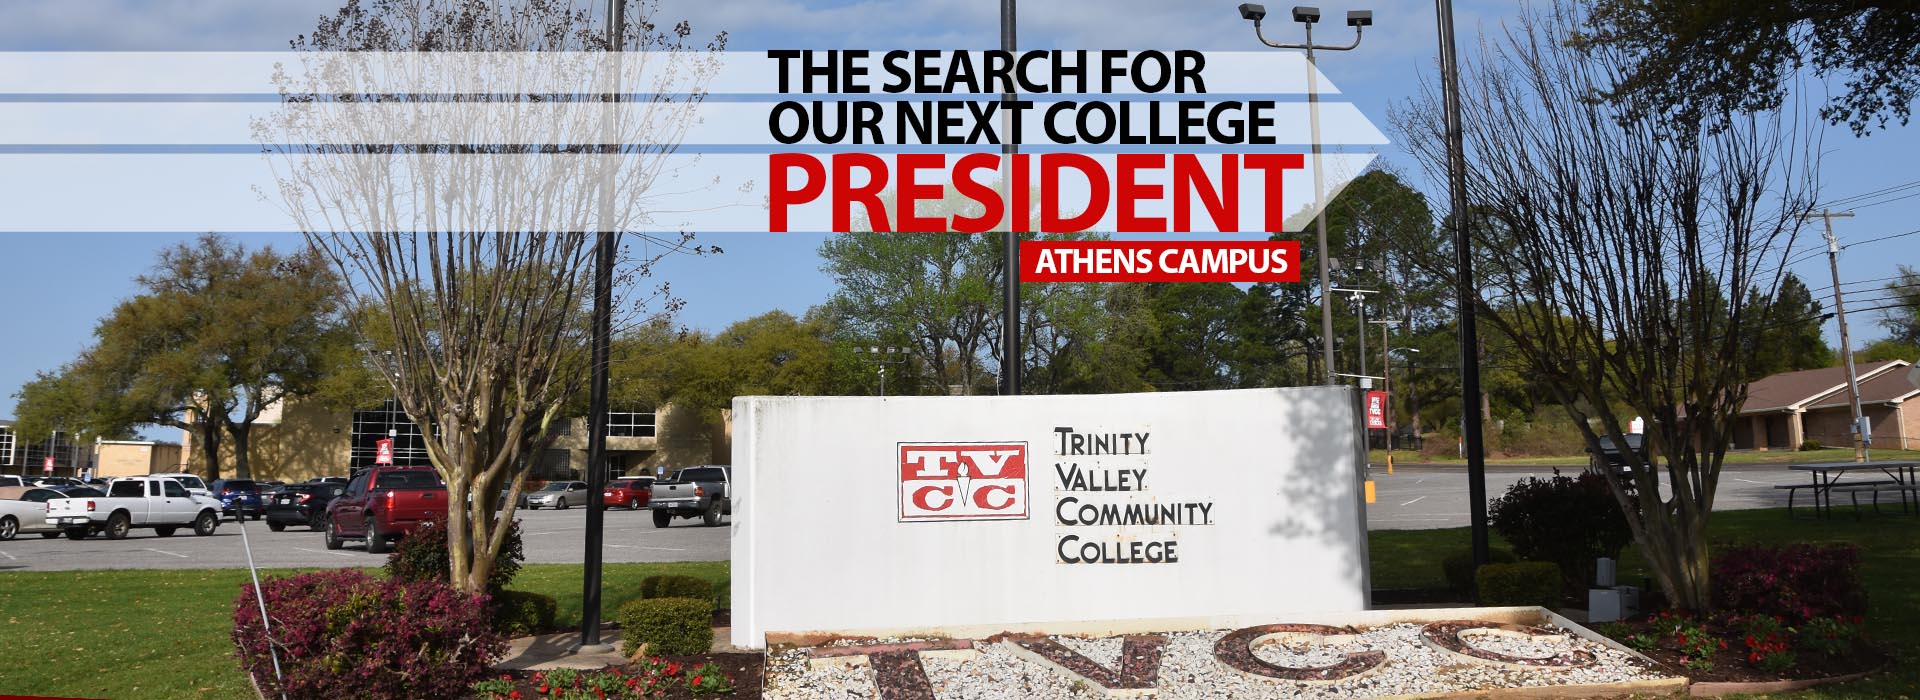 The search for our next college President - Athens Campus